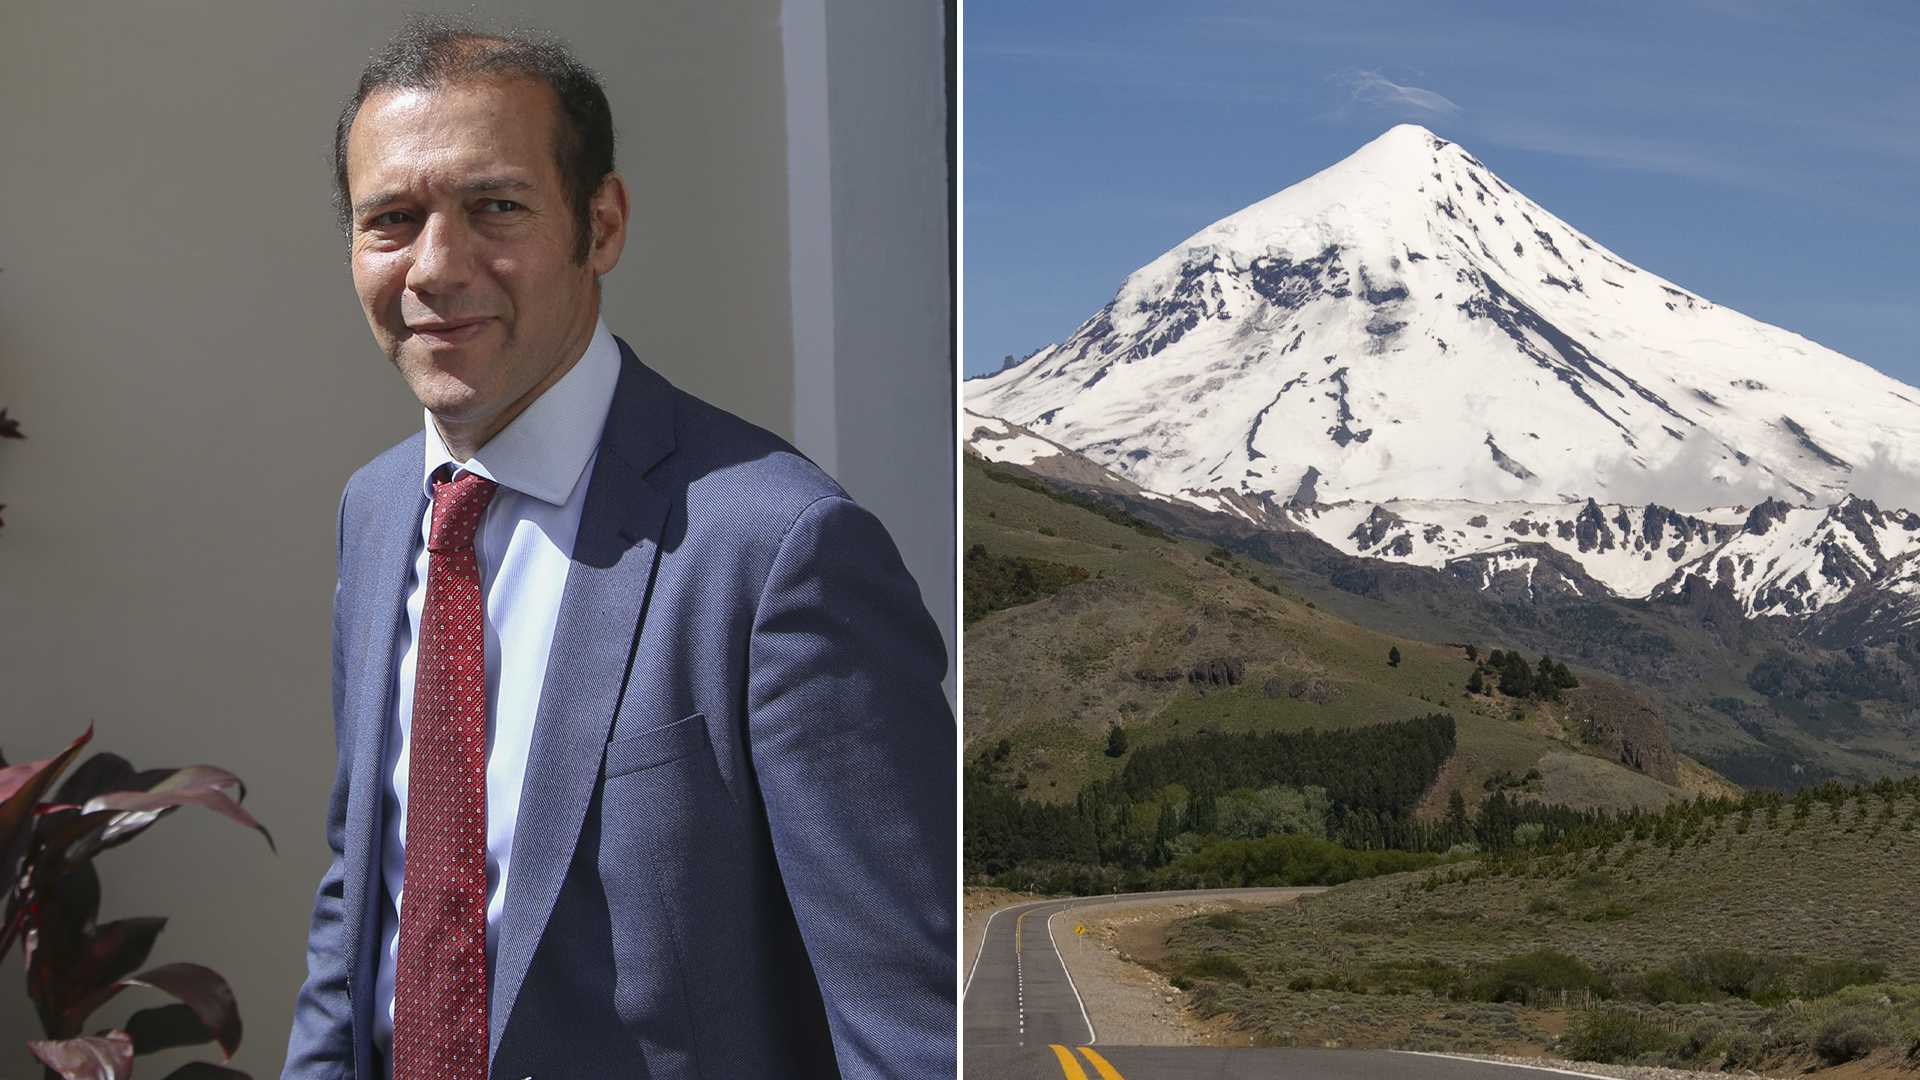 The controversy, the strong statements by the opposition and the Neuquén governor's own words, ended up putting pressure on the APN and causing it to back down.